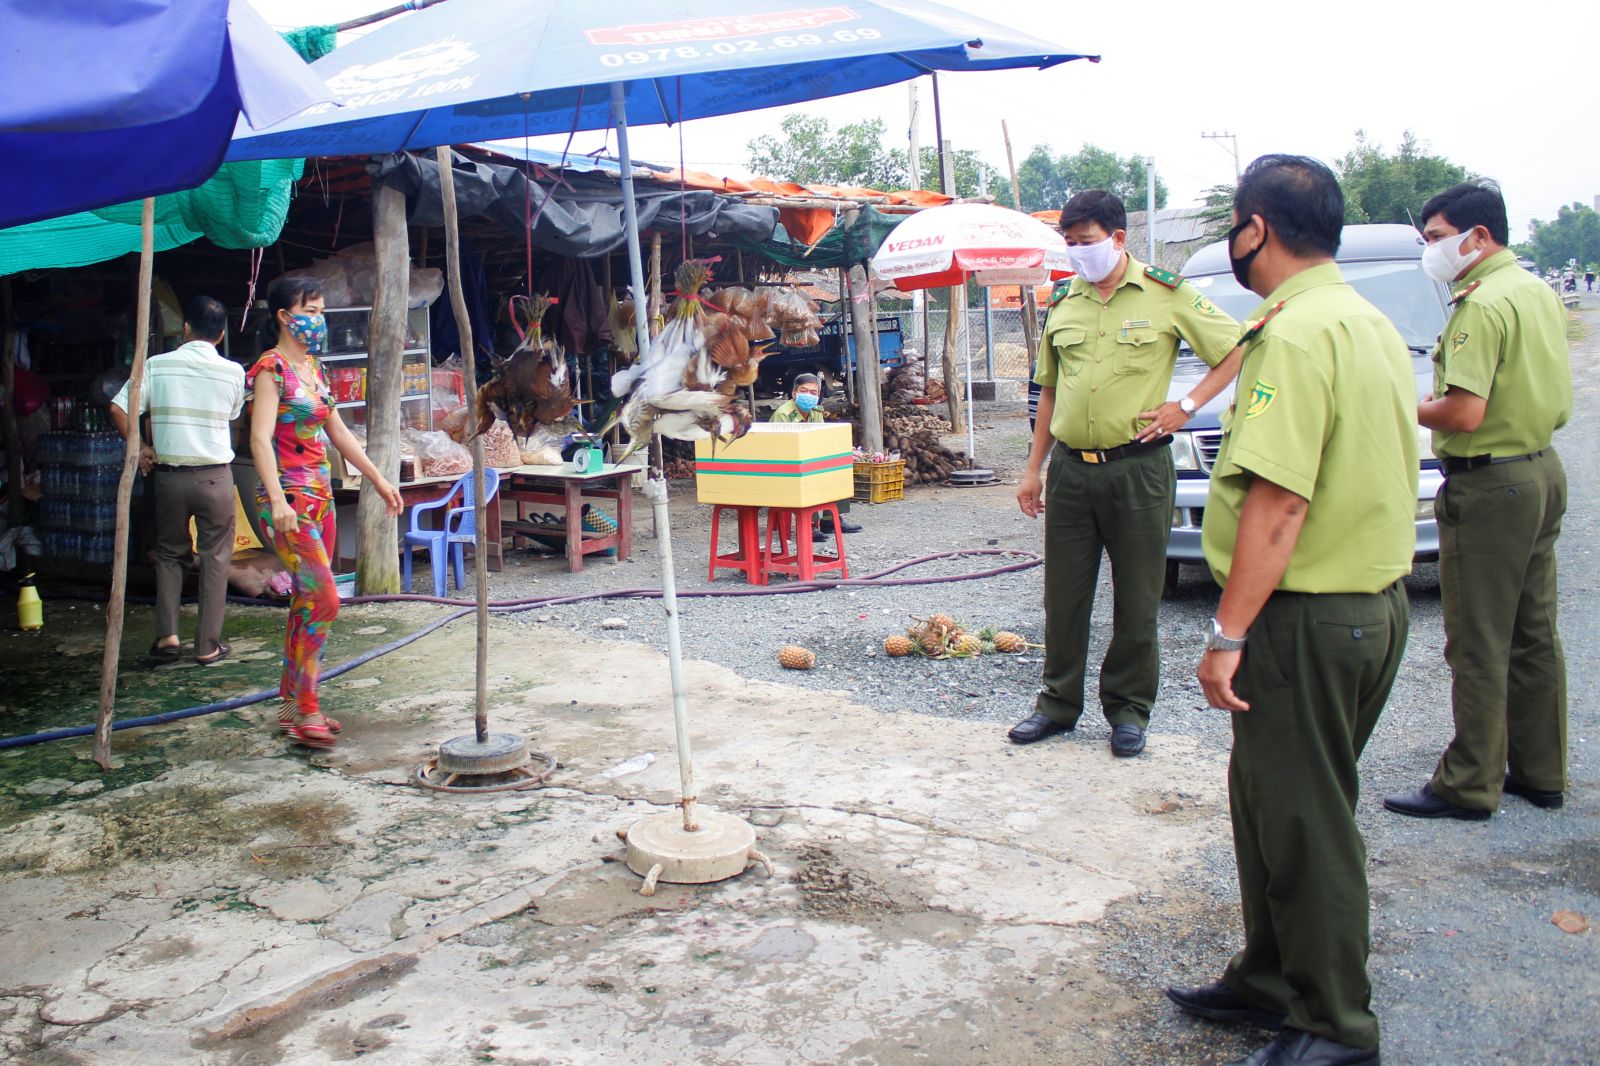 The inspection team discover and ask the shop owner to release about 20 individuals of the stork in natural environment